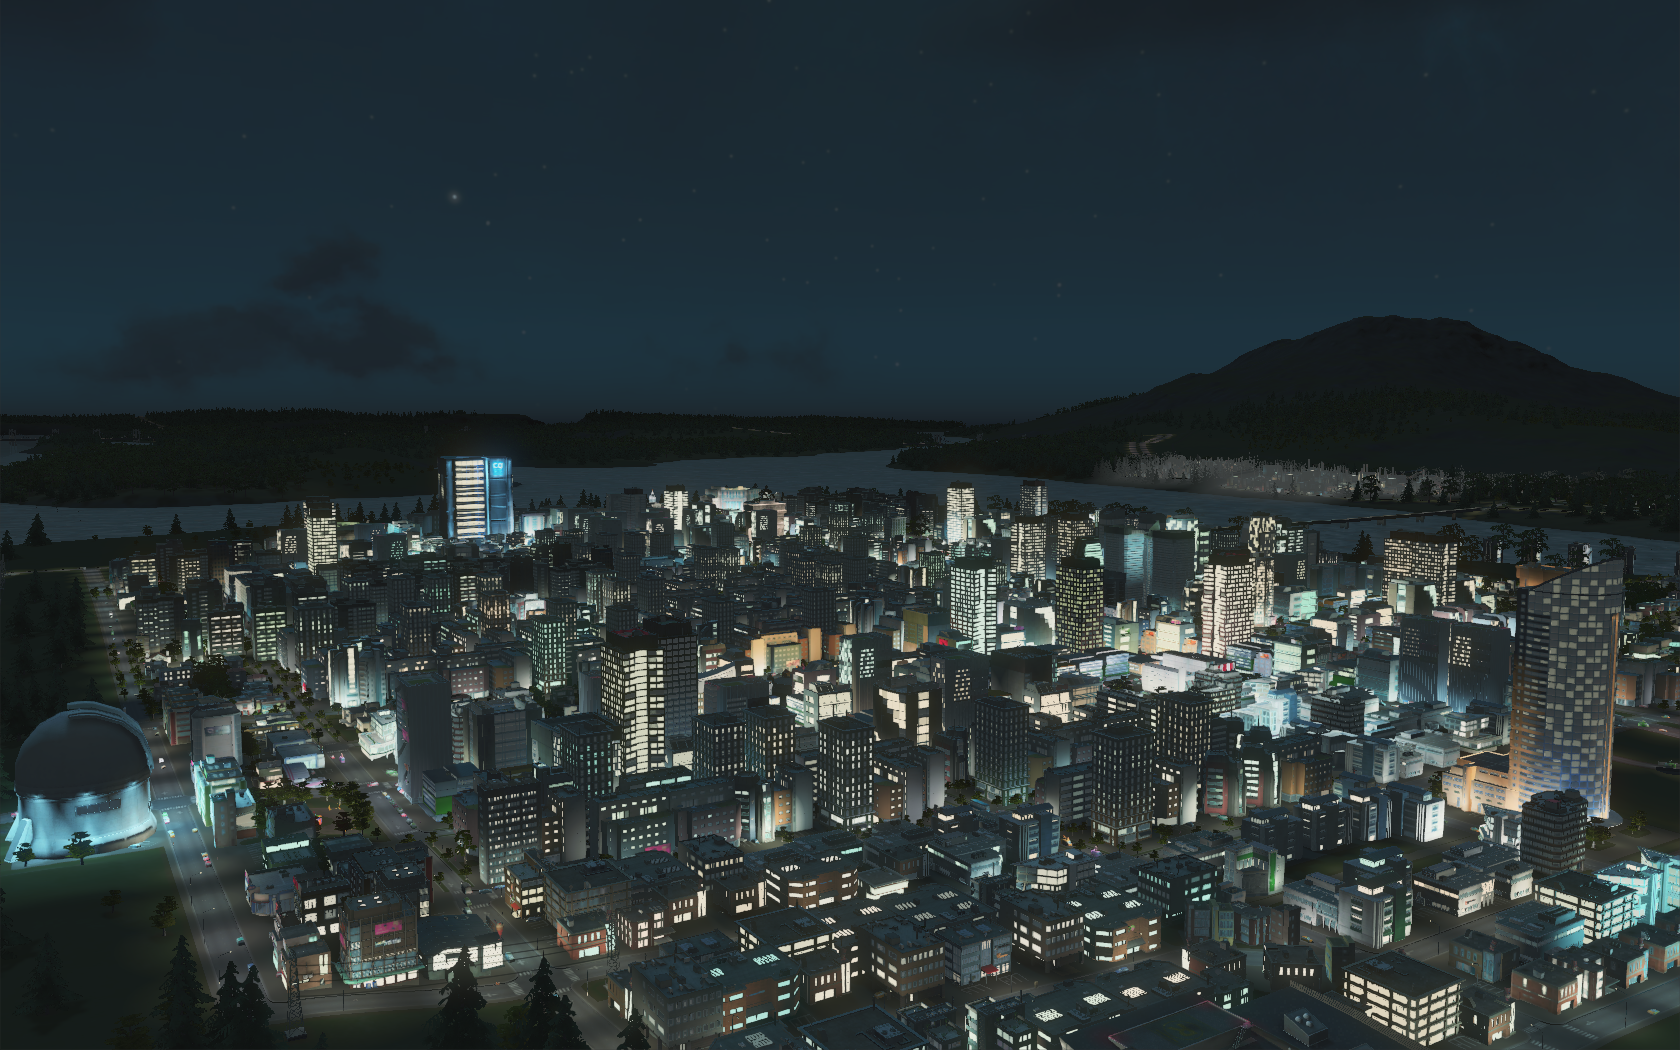 After Dark expansion for Cities: Skylines detailed